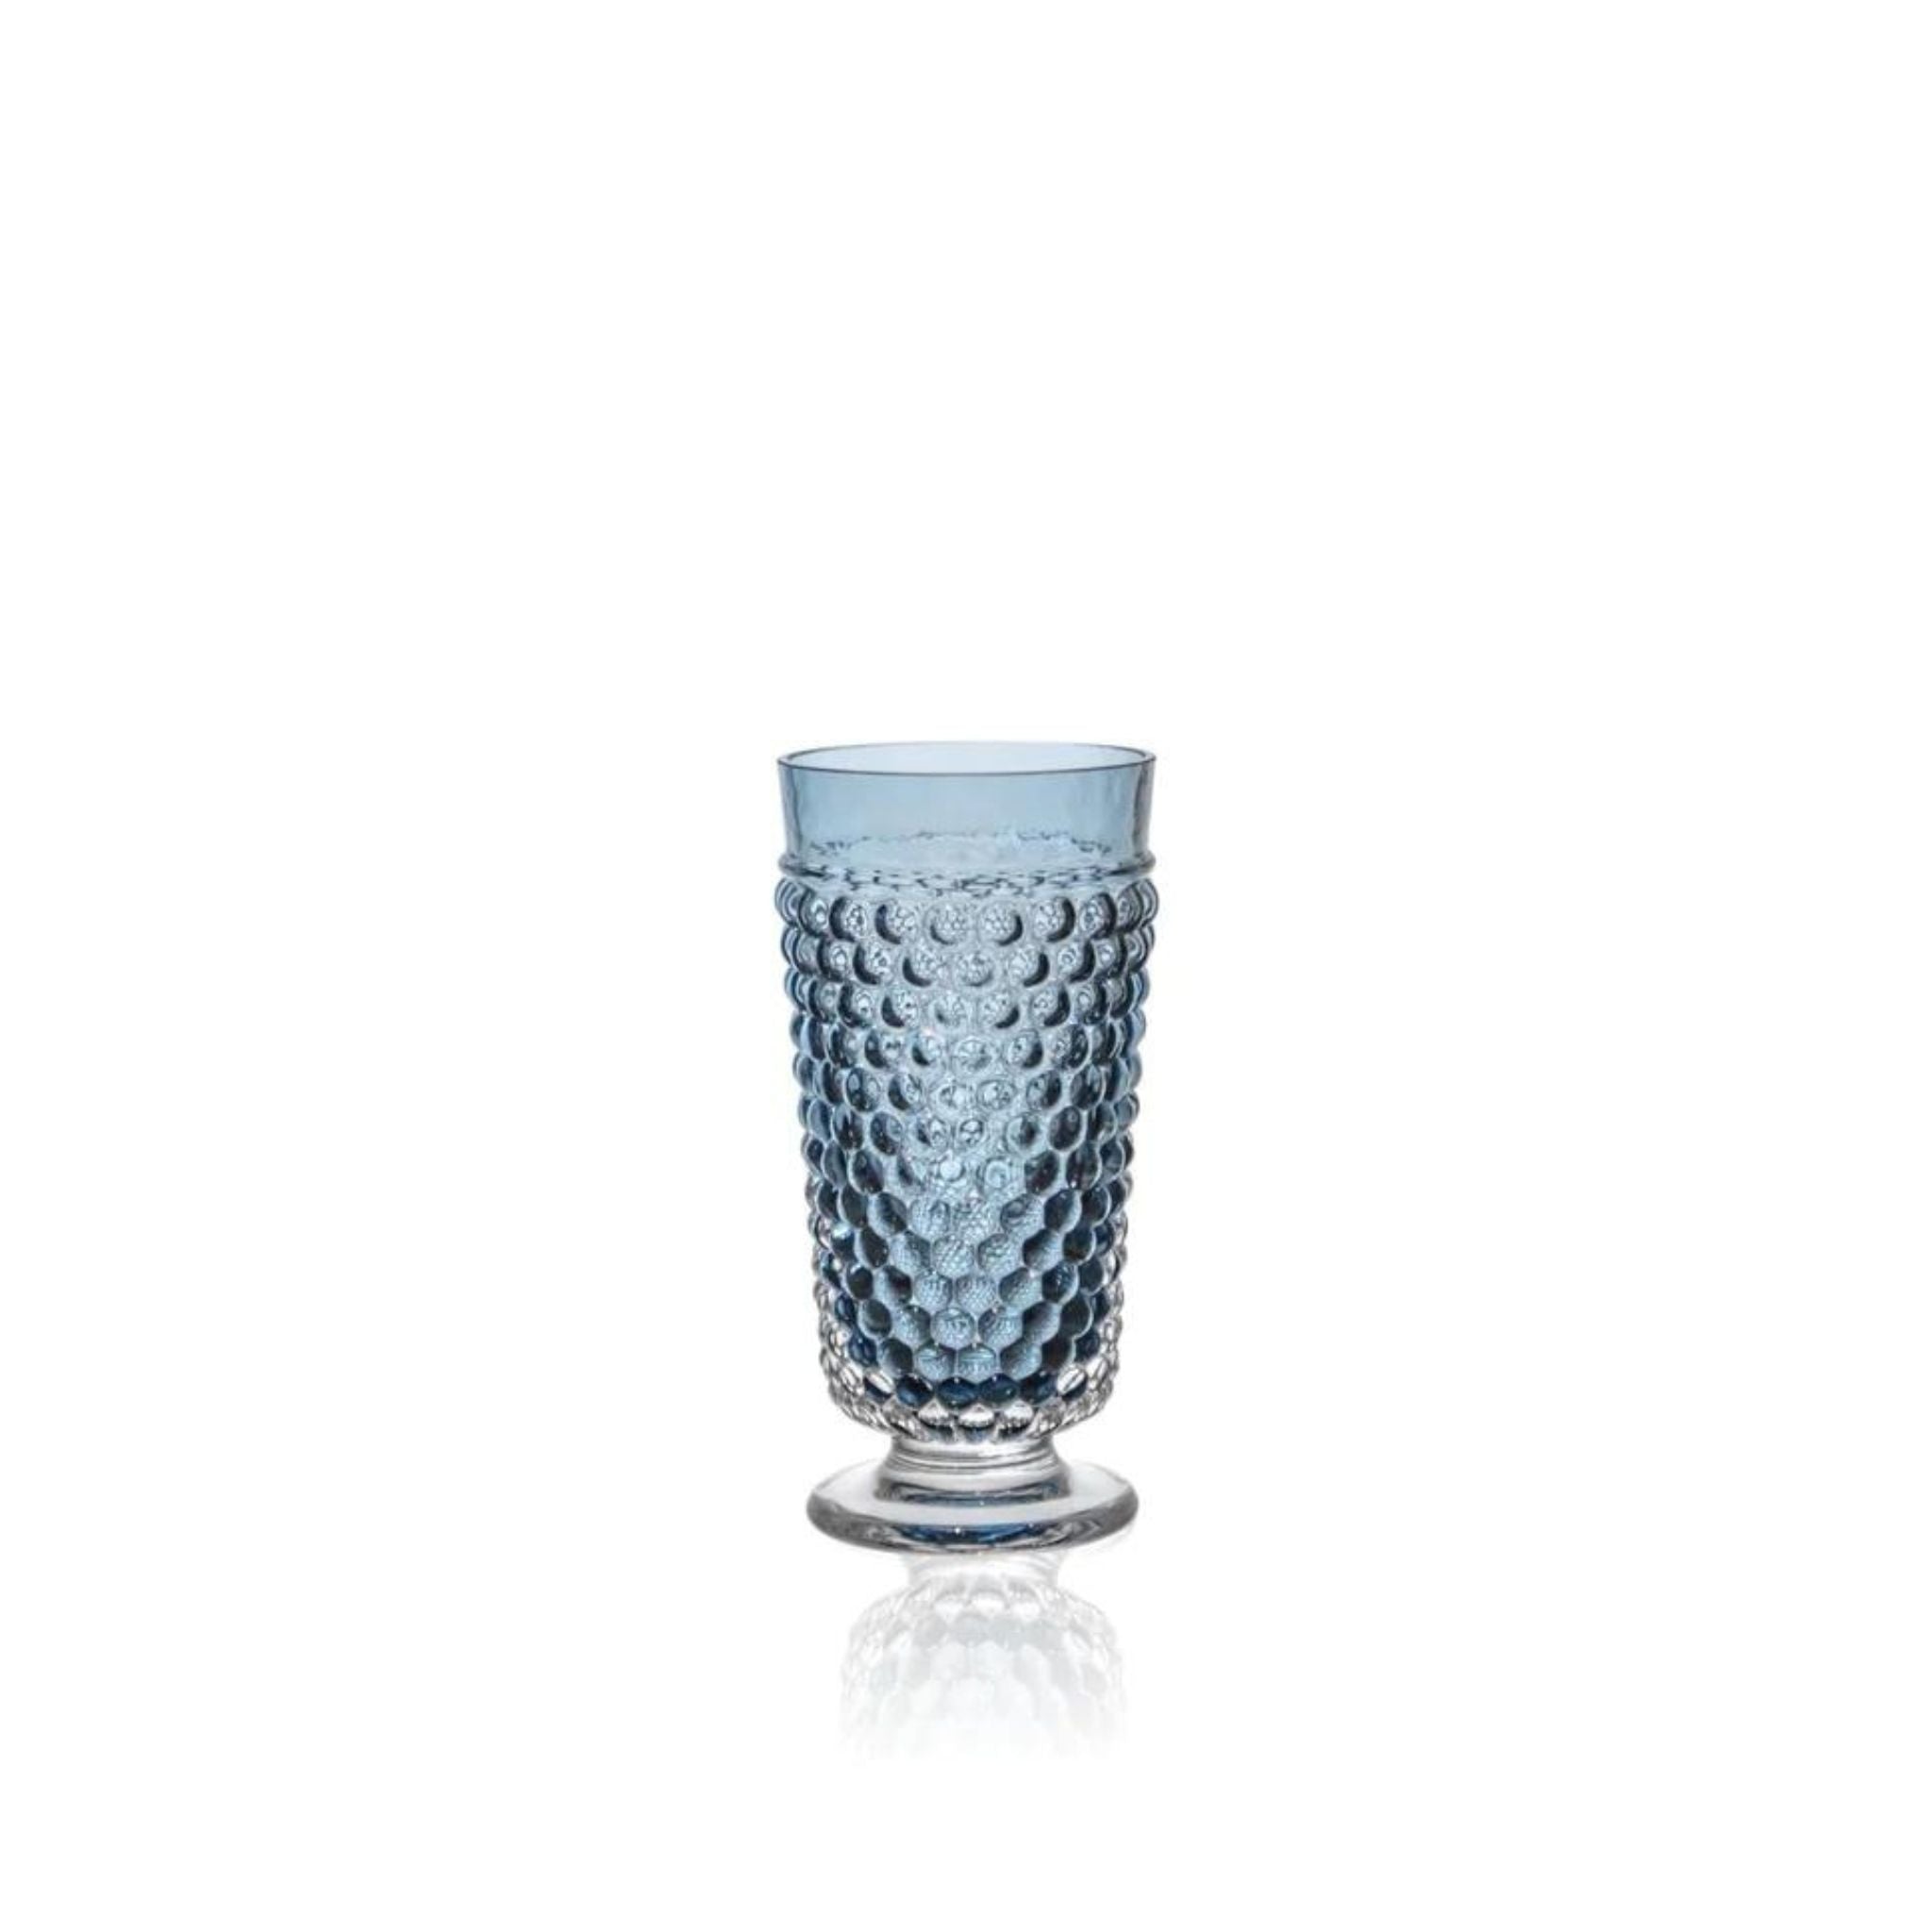 a blue hobnail glass is sitting on a white surface